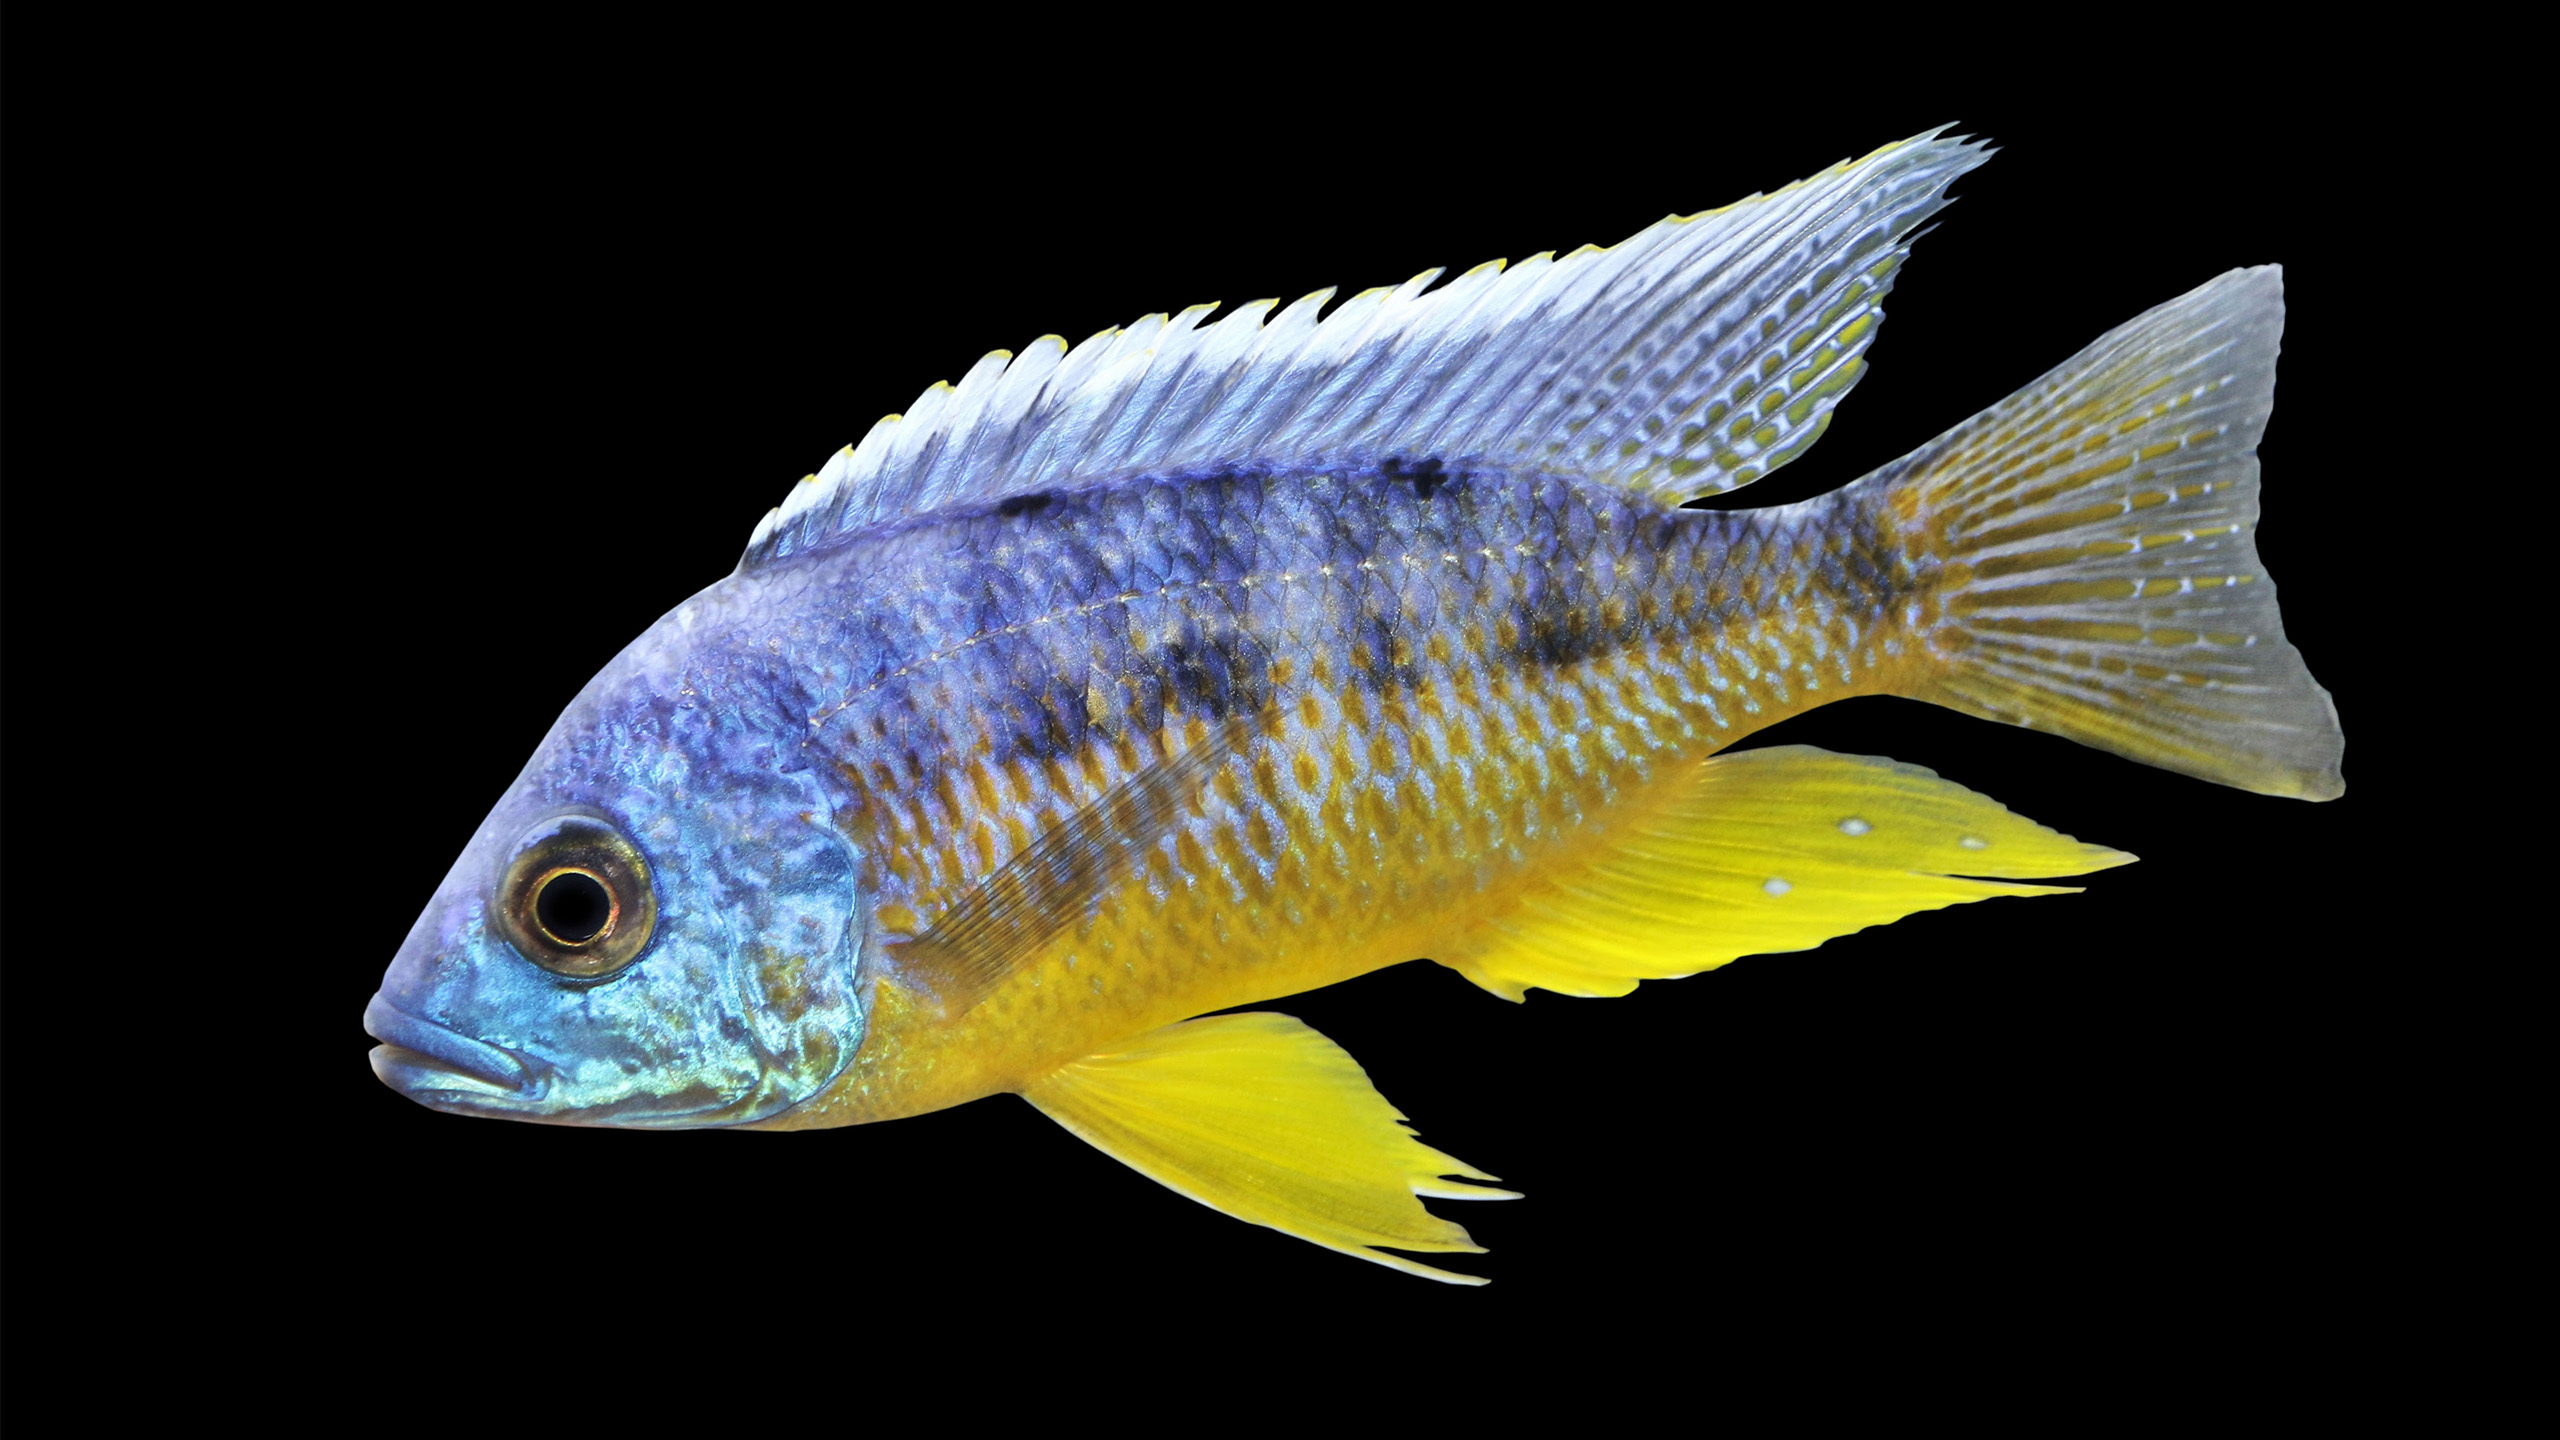 Not only in appearance, but also in food acquisition, Malawi cichlids have evolved a wide variety: Protomelas fenestratus whirls up its prey with a jet of water from its mouth. | Arunee Rodloy, Shutterstock